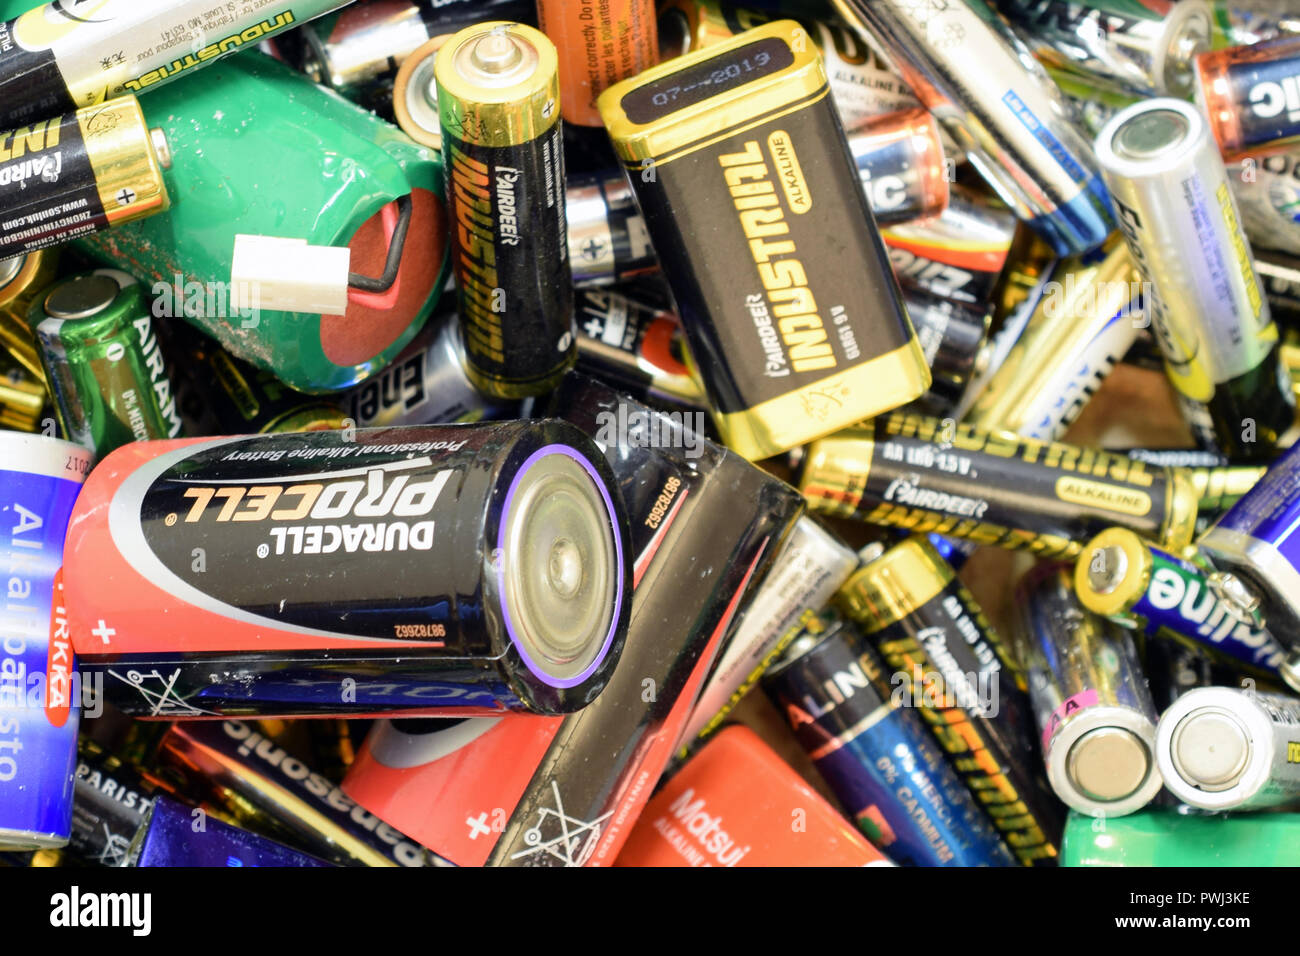 TURKU, FINLAND - September 19, 2018: Close up of many used batteries Stock Photo